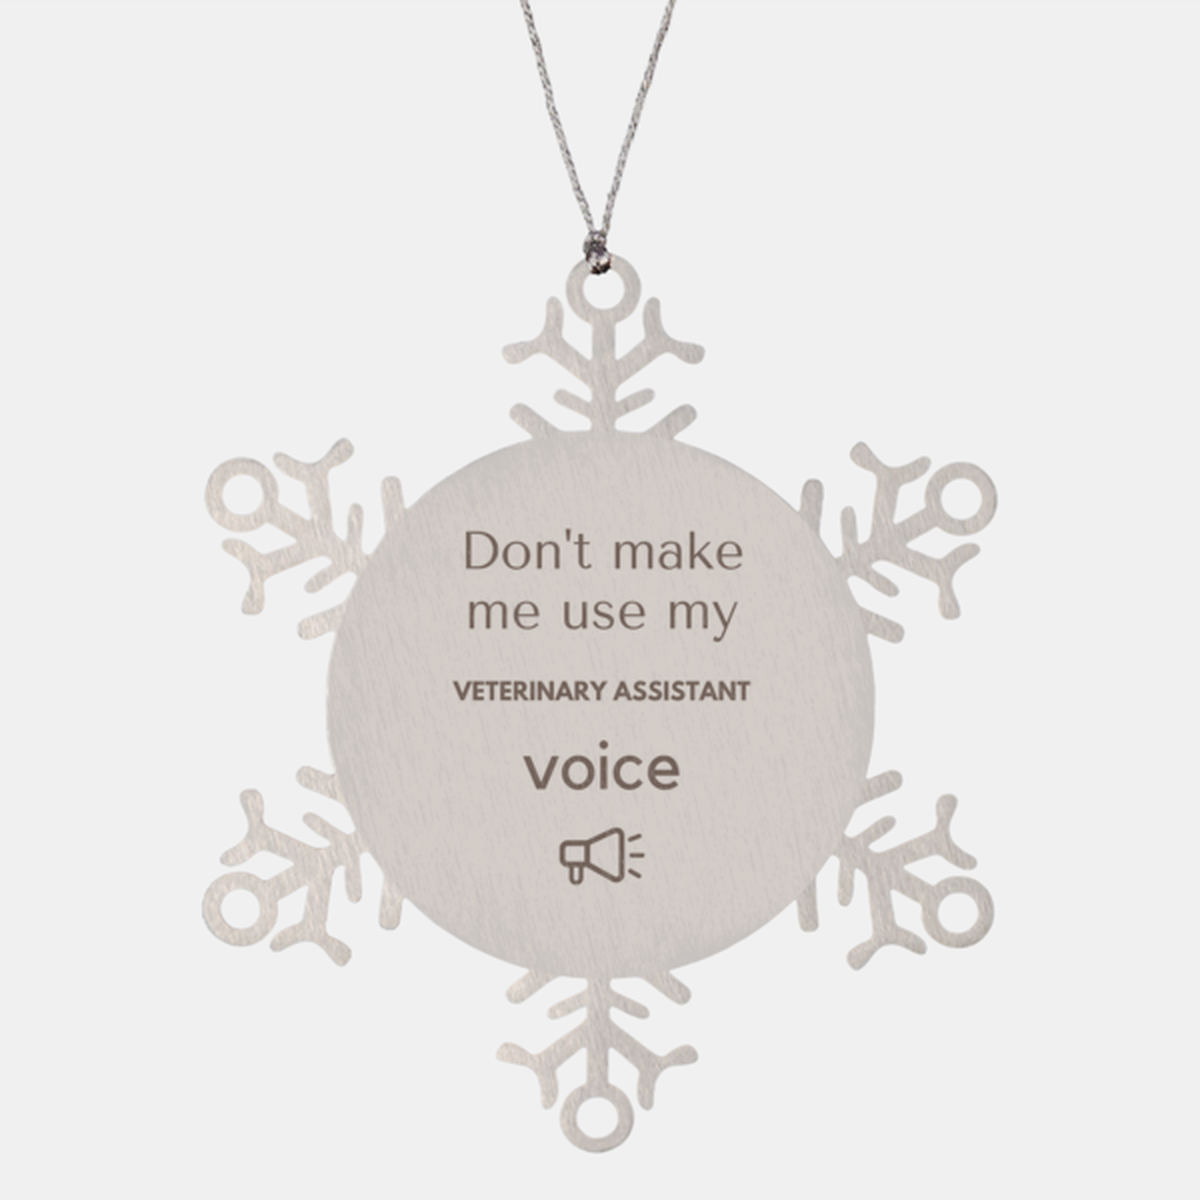 Don't make me use my Veterinary Assistant voice, Sarcasm Veterinary Assistant Ornament Gifts, Christmas Veterinary Assistant Snowflake Ornament Unique Gifts For Veterinary Assistant Coworkers, Men, Women, Colleague, Friends